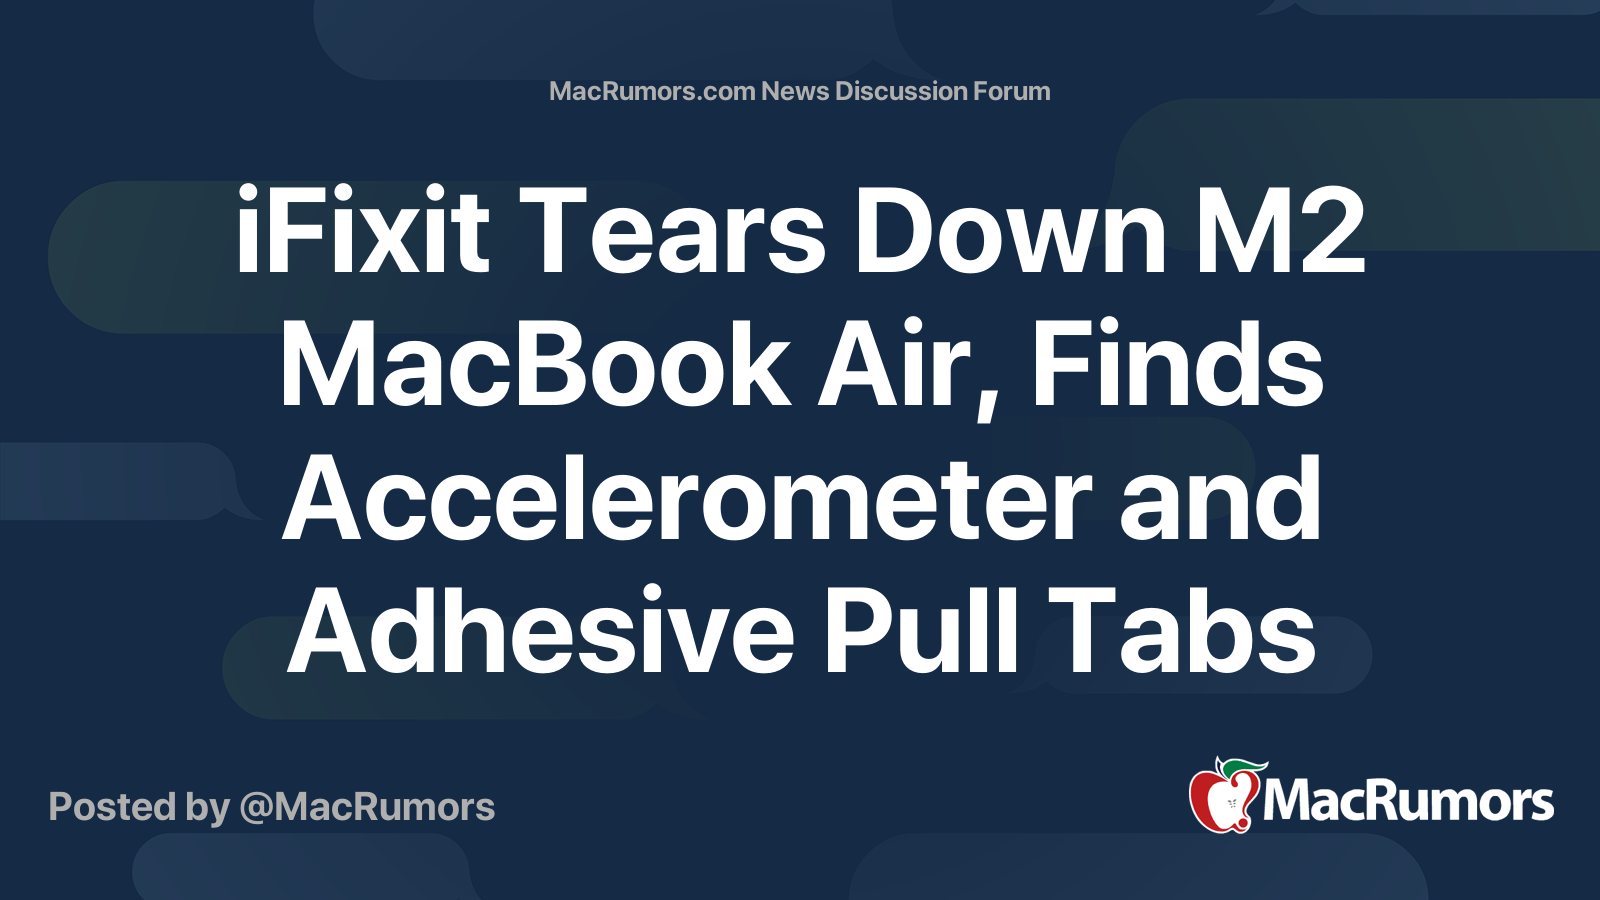 iFixit Tears Down M2 MacBook Air, Finds Accelerometer and Adhesive Pull Tabs for Battery